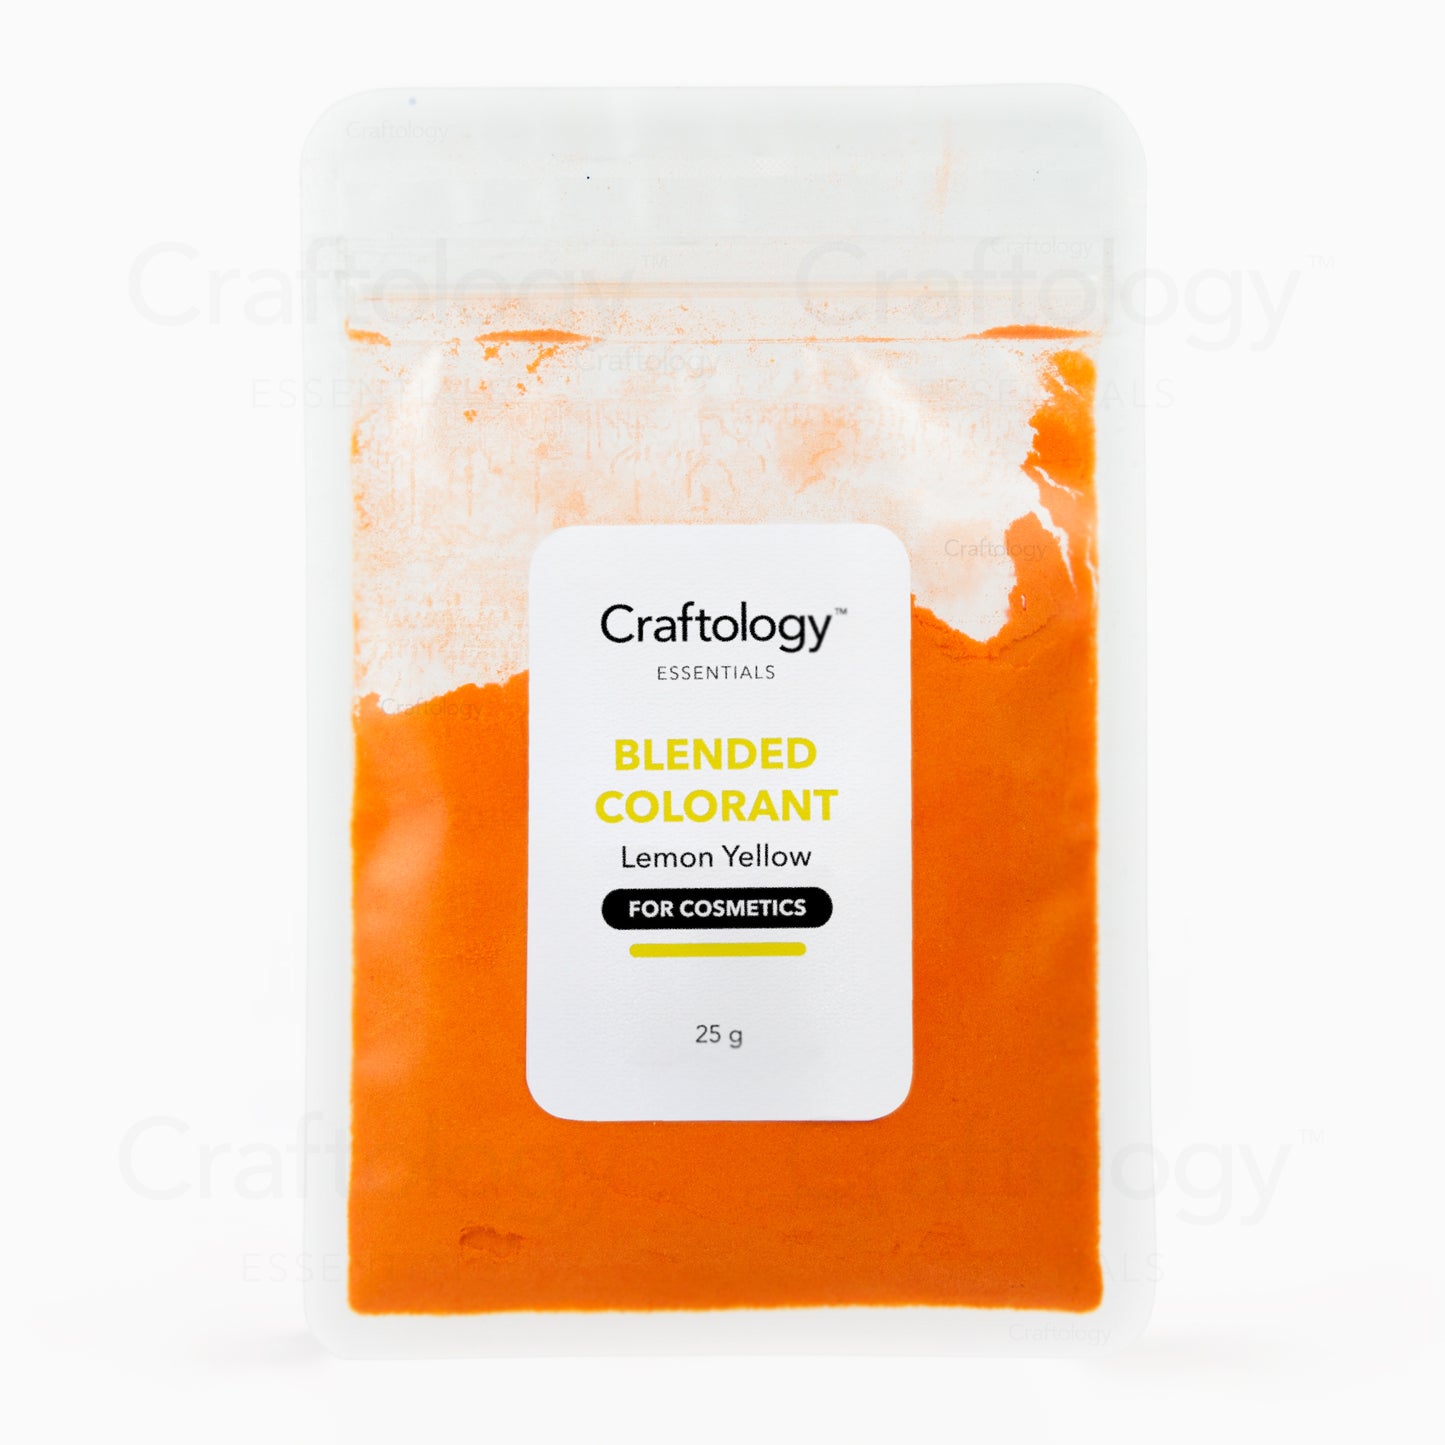 Blended Colorant - Lemon Yellow - Craftology Essentials - Philippines